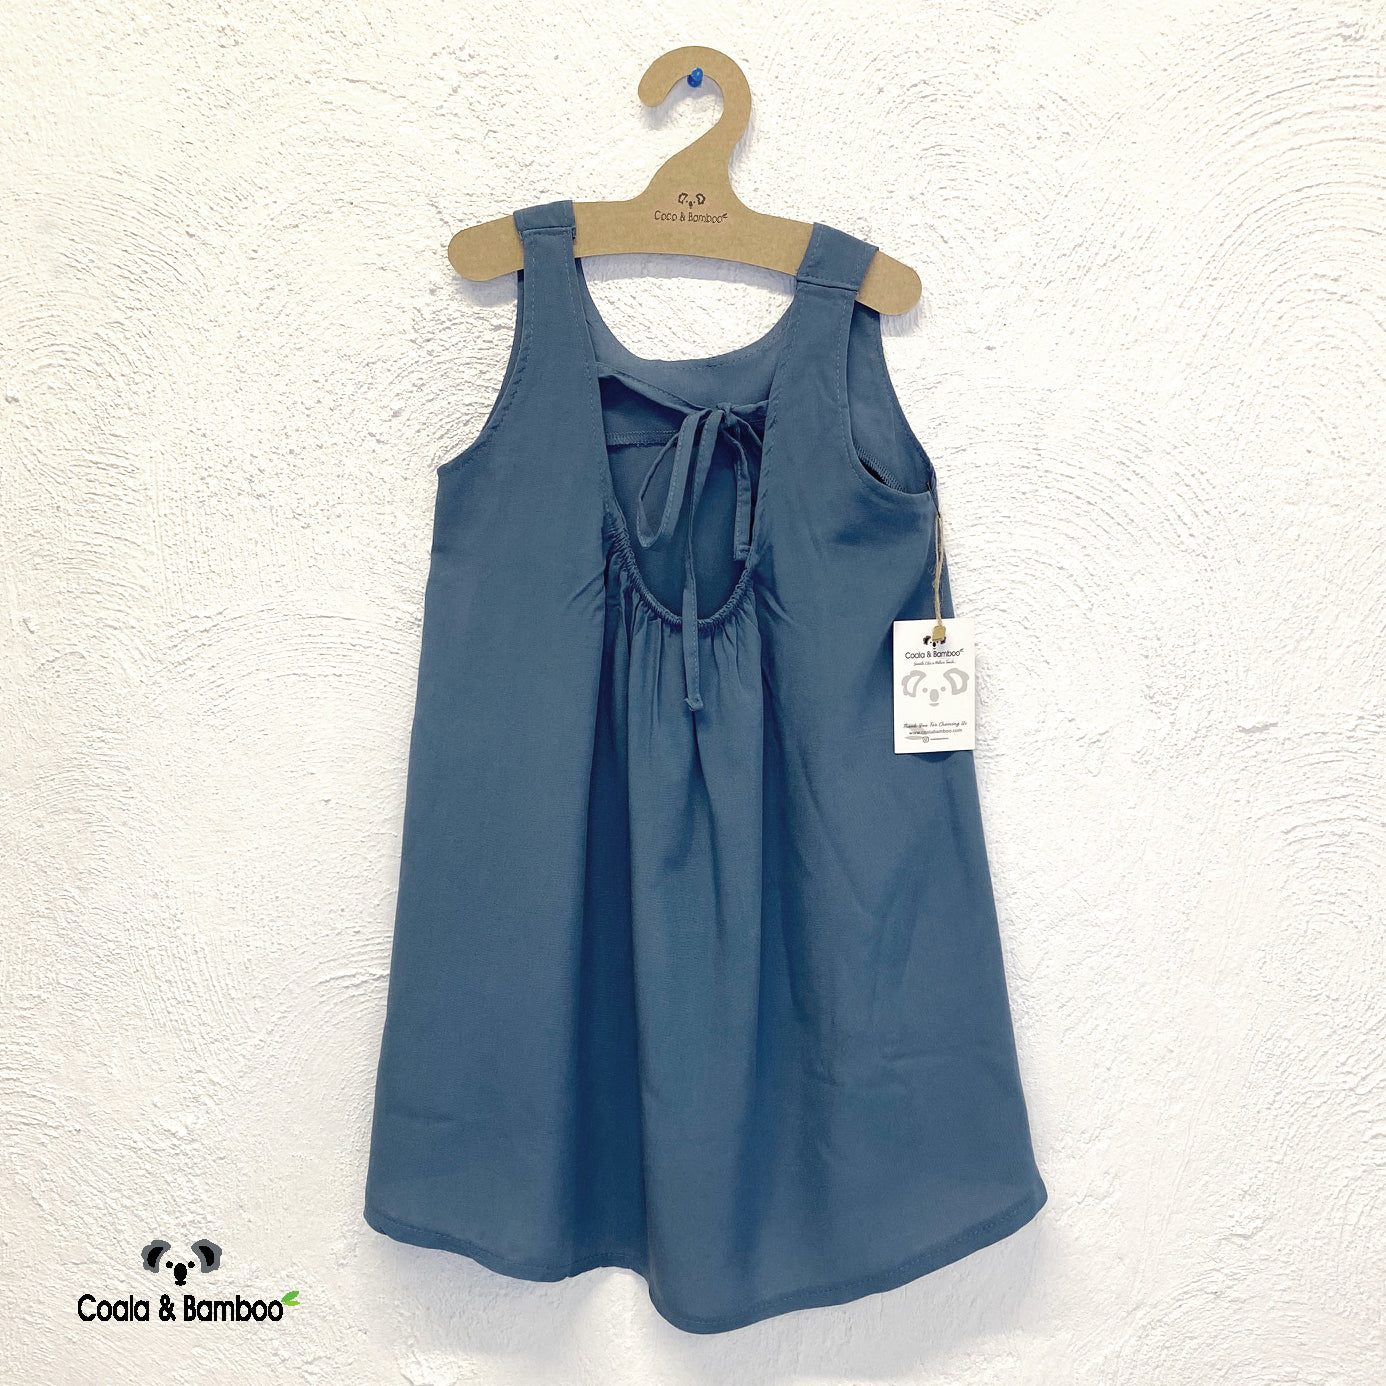 Doha dress for girls Aged 3 Yrs to 9 Yrs- Colored Blue